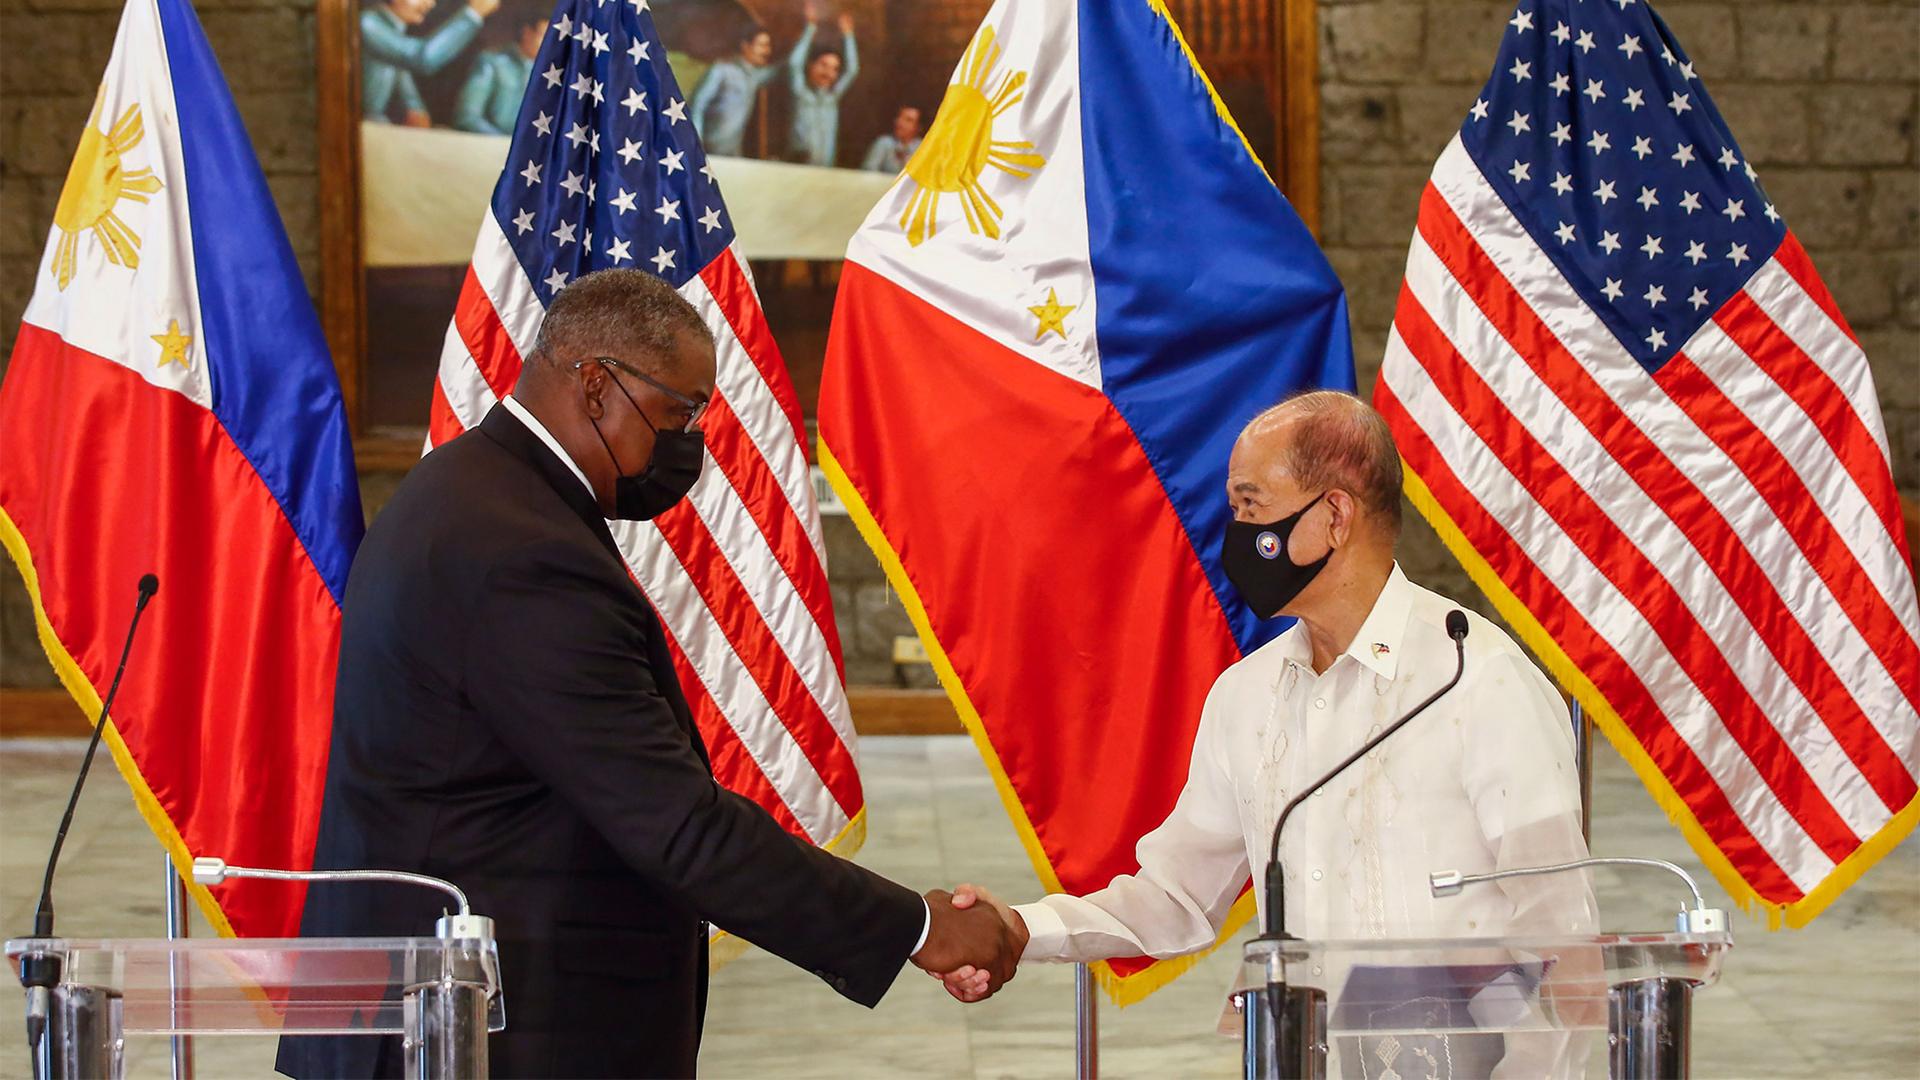 United States Defense Secretary Lloyd Austin and Philippines Defense Secretary Delfin Lorenzana shake hands after a bilateral meeting with their counties' flags behind them